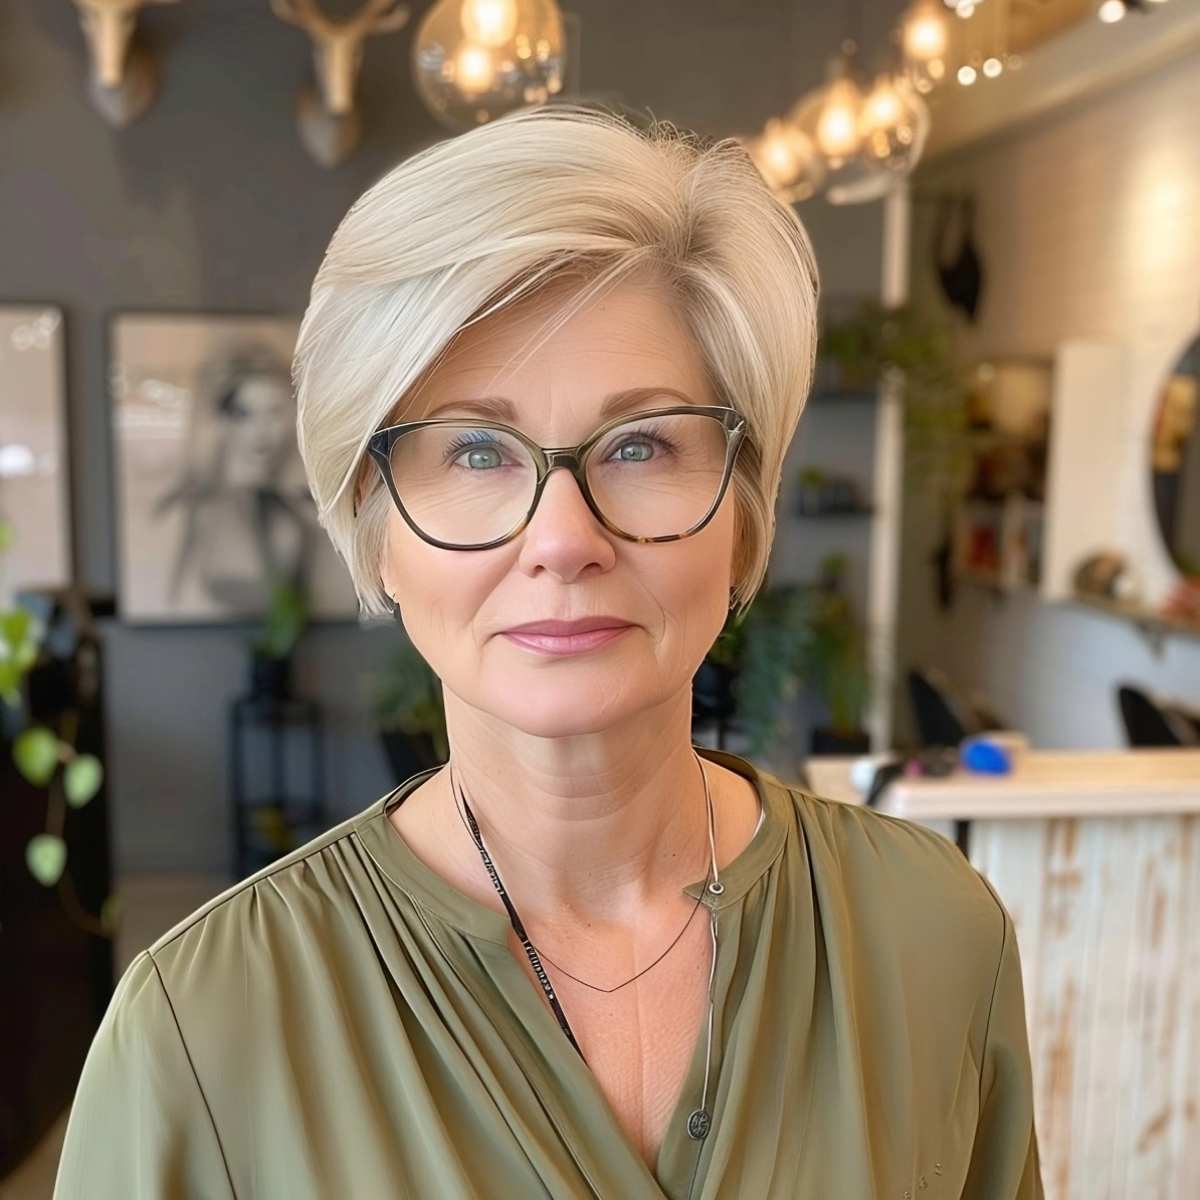 Straight and Sleek Cut for Older Women with Glasses